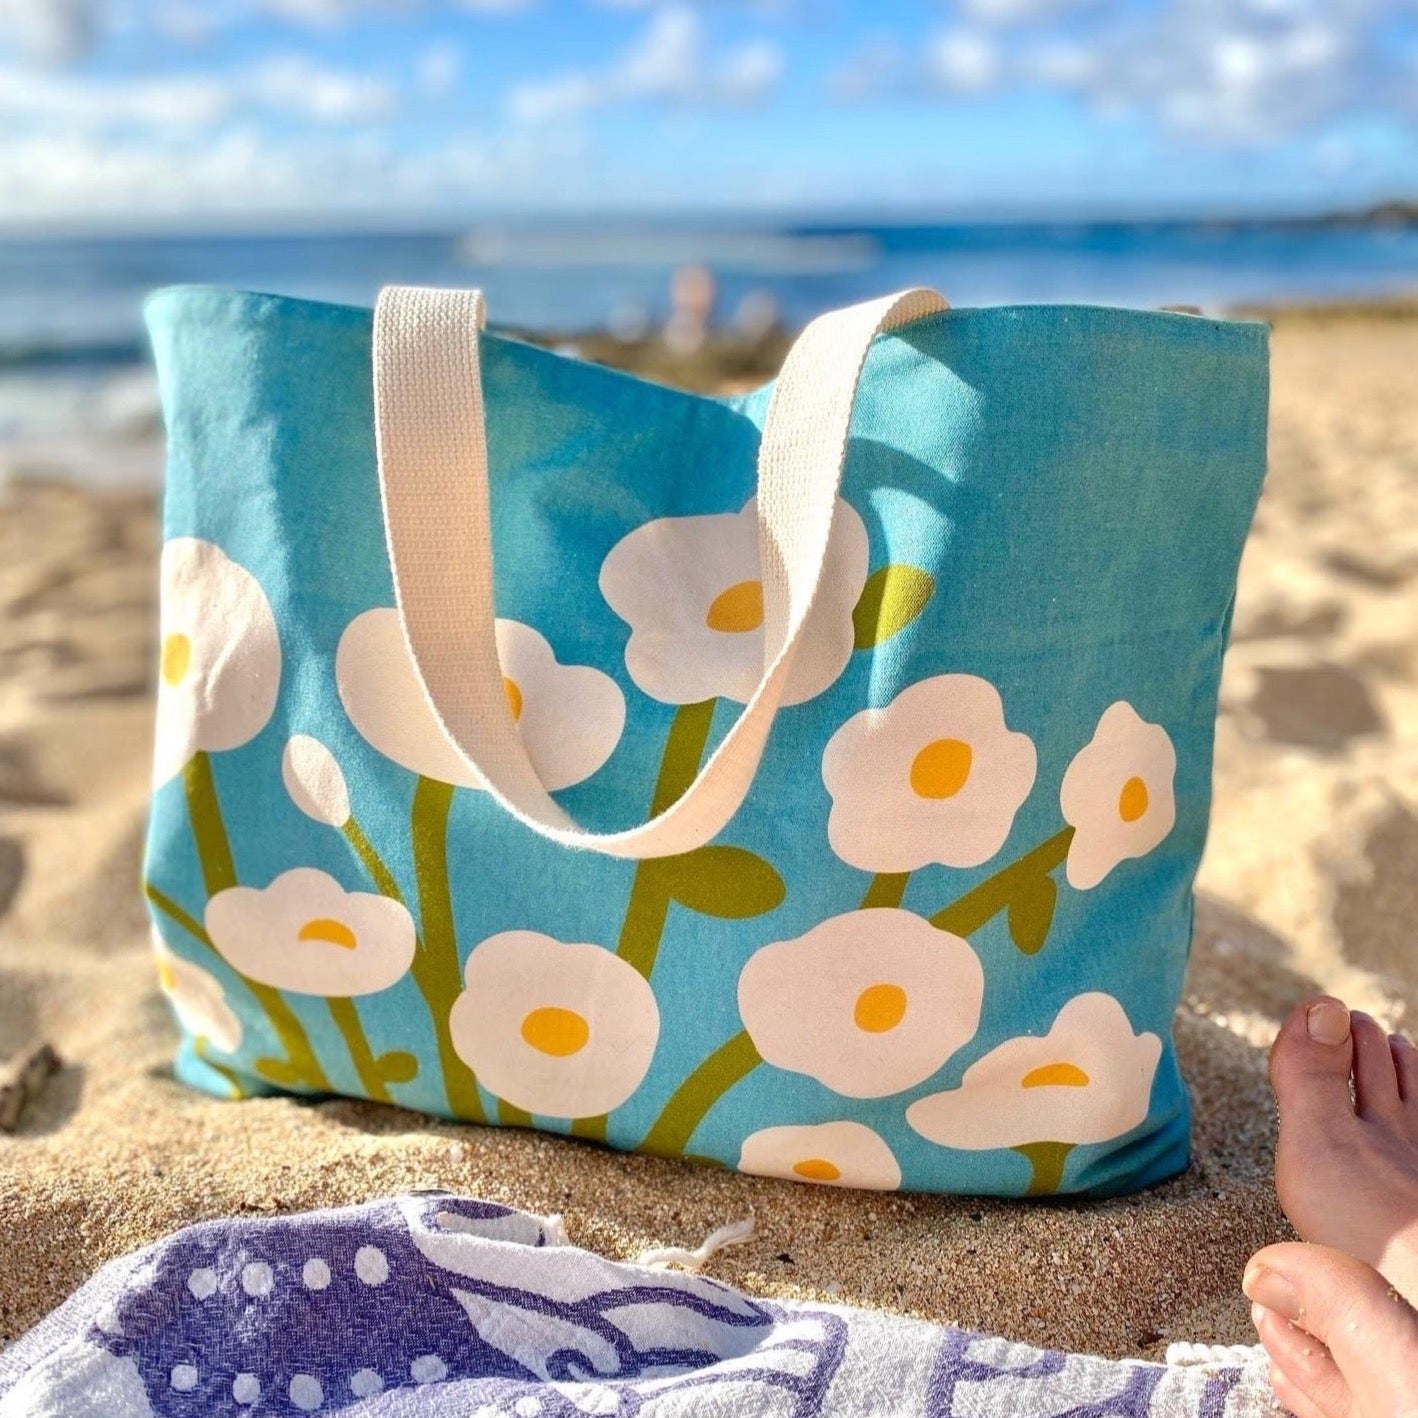 Big, sunny white and yellow flowers on this scandi-inspired beach bag with a sky blue background. 